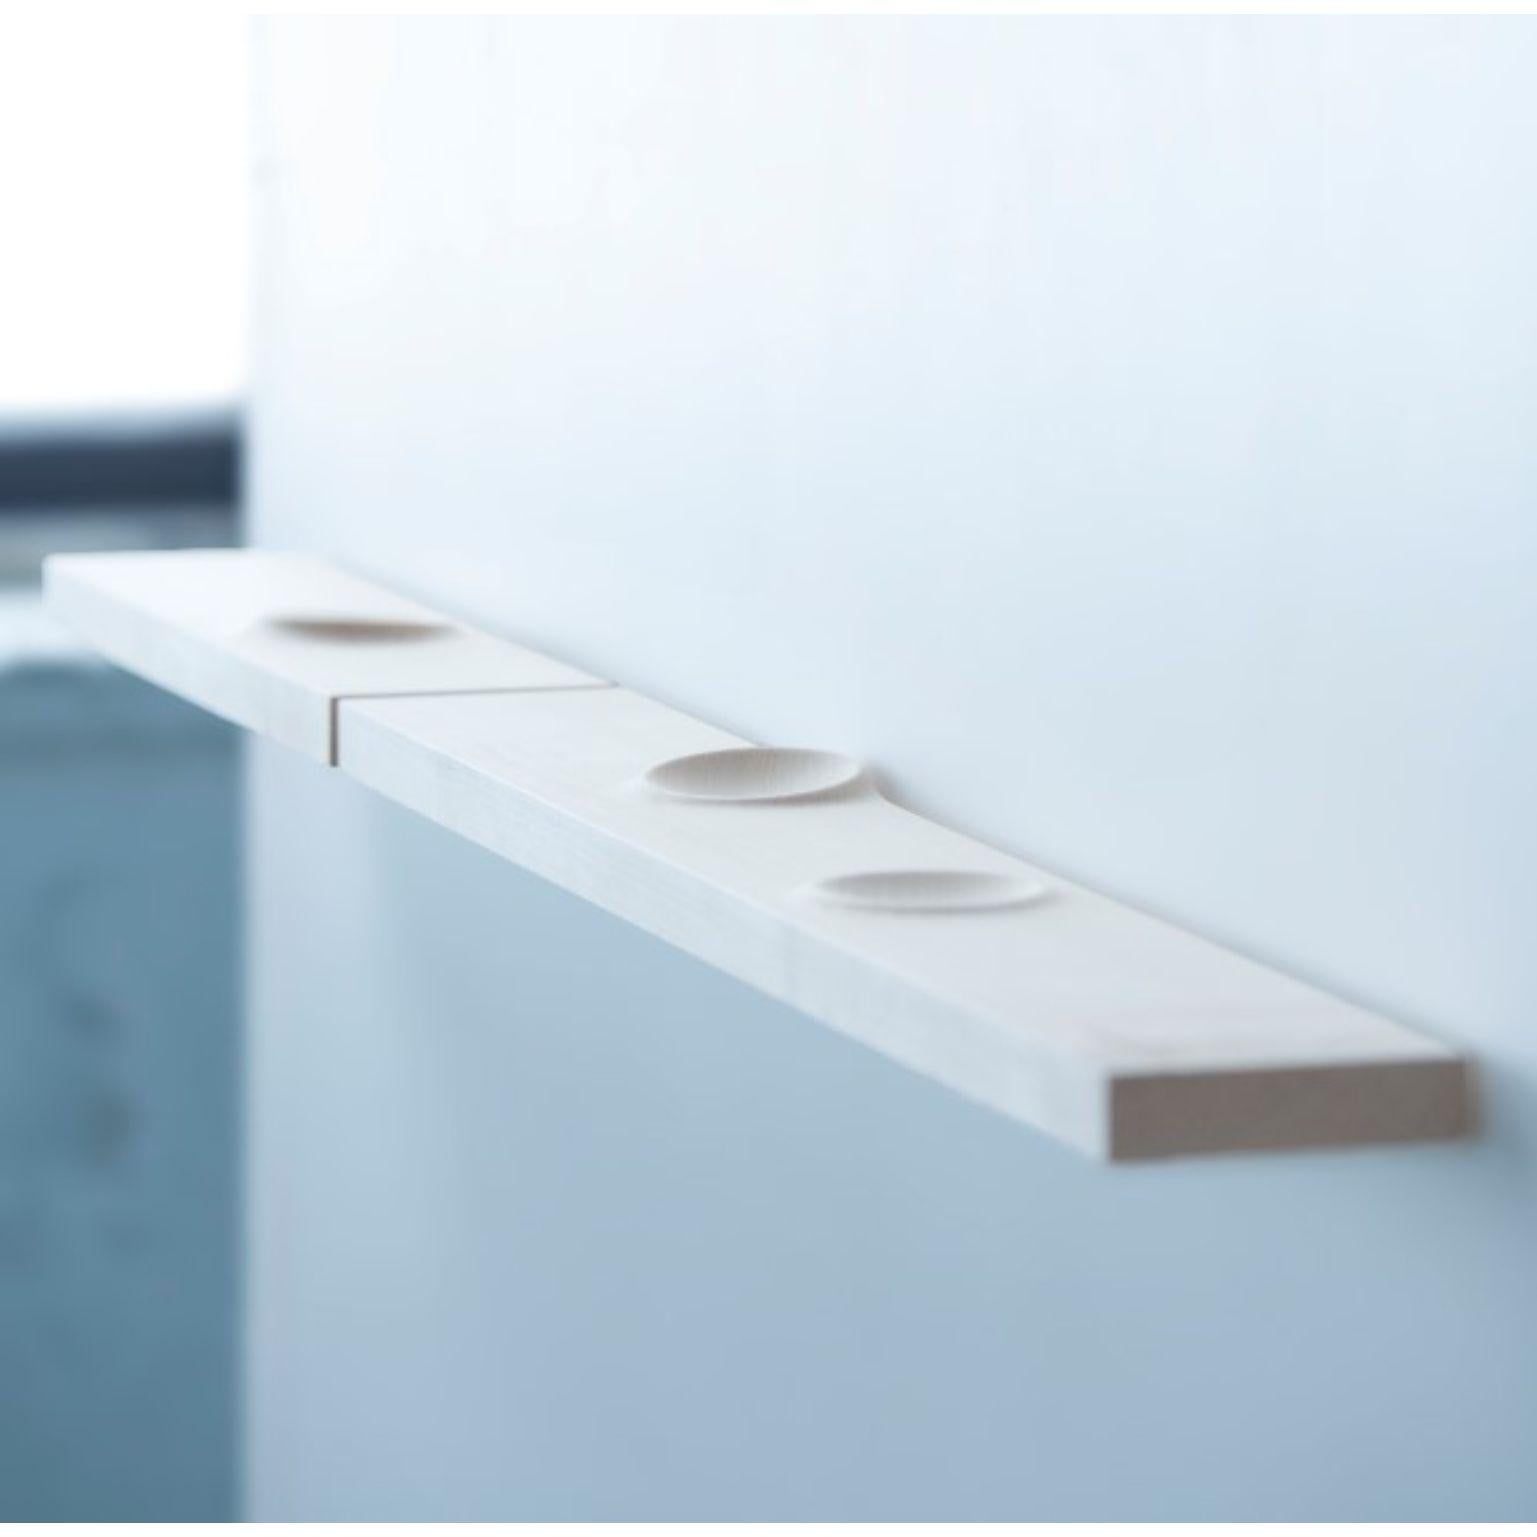 Small plato shelf by Antrei Hartikainen
Materials: Maple, Natural oil mix
Dimensions: W 60, D 10, H 3,5 cm

Also Available: different sizes.

The surface of the moon is the inspiration for the plato shelf unit with. Keys, jewelry and other